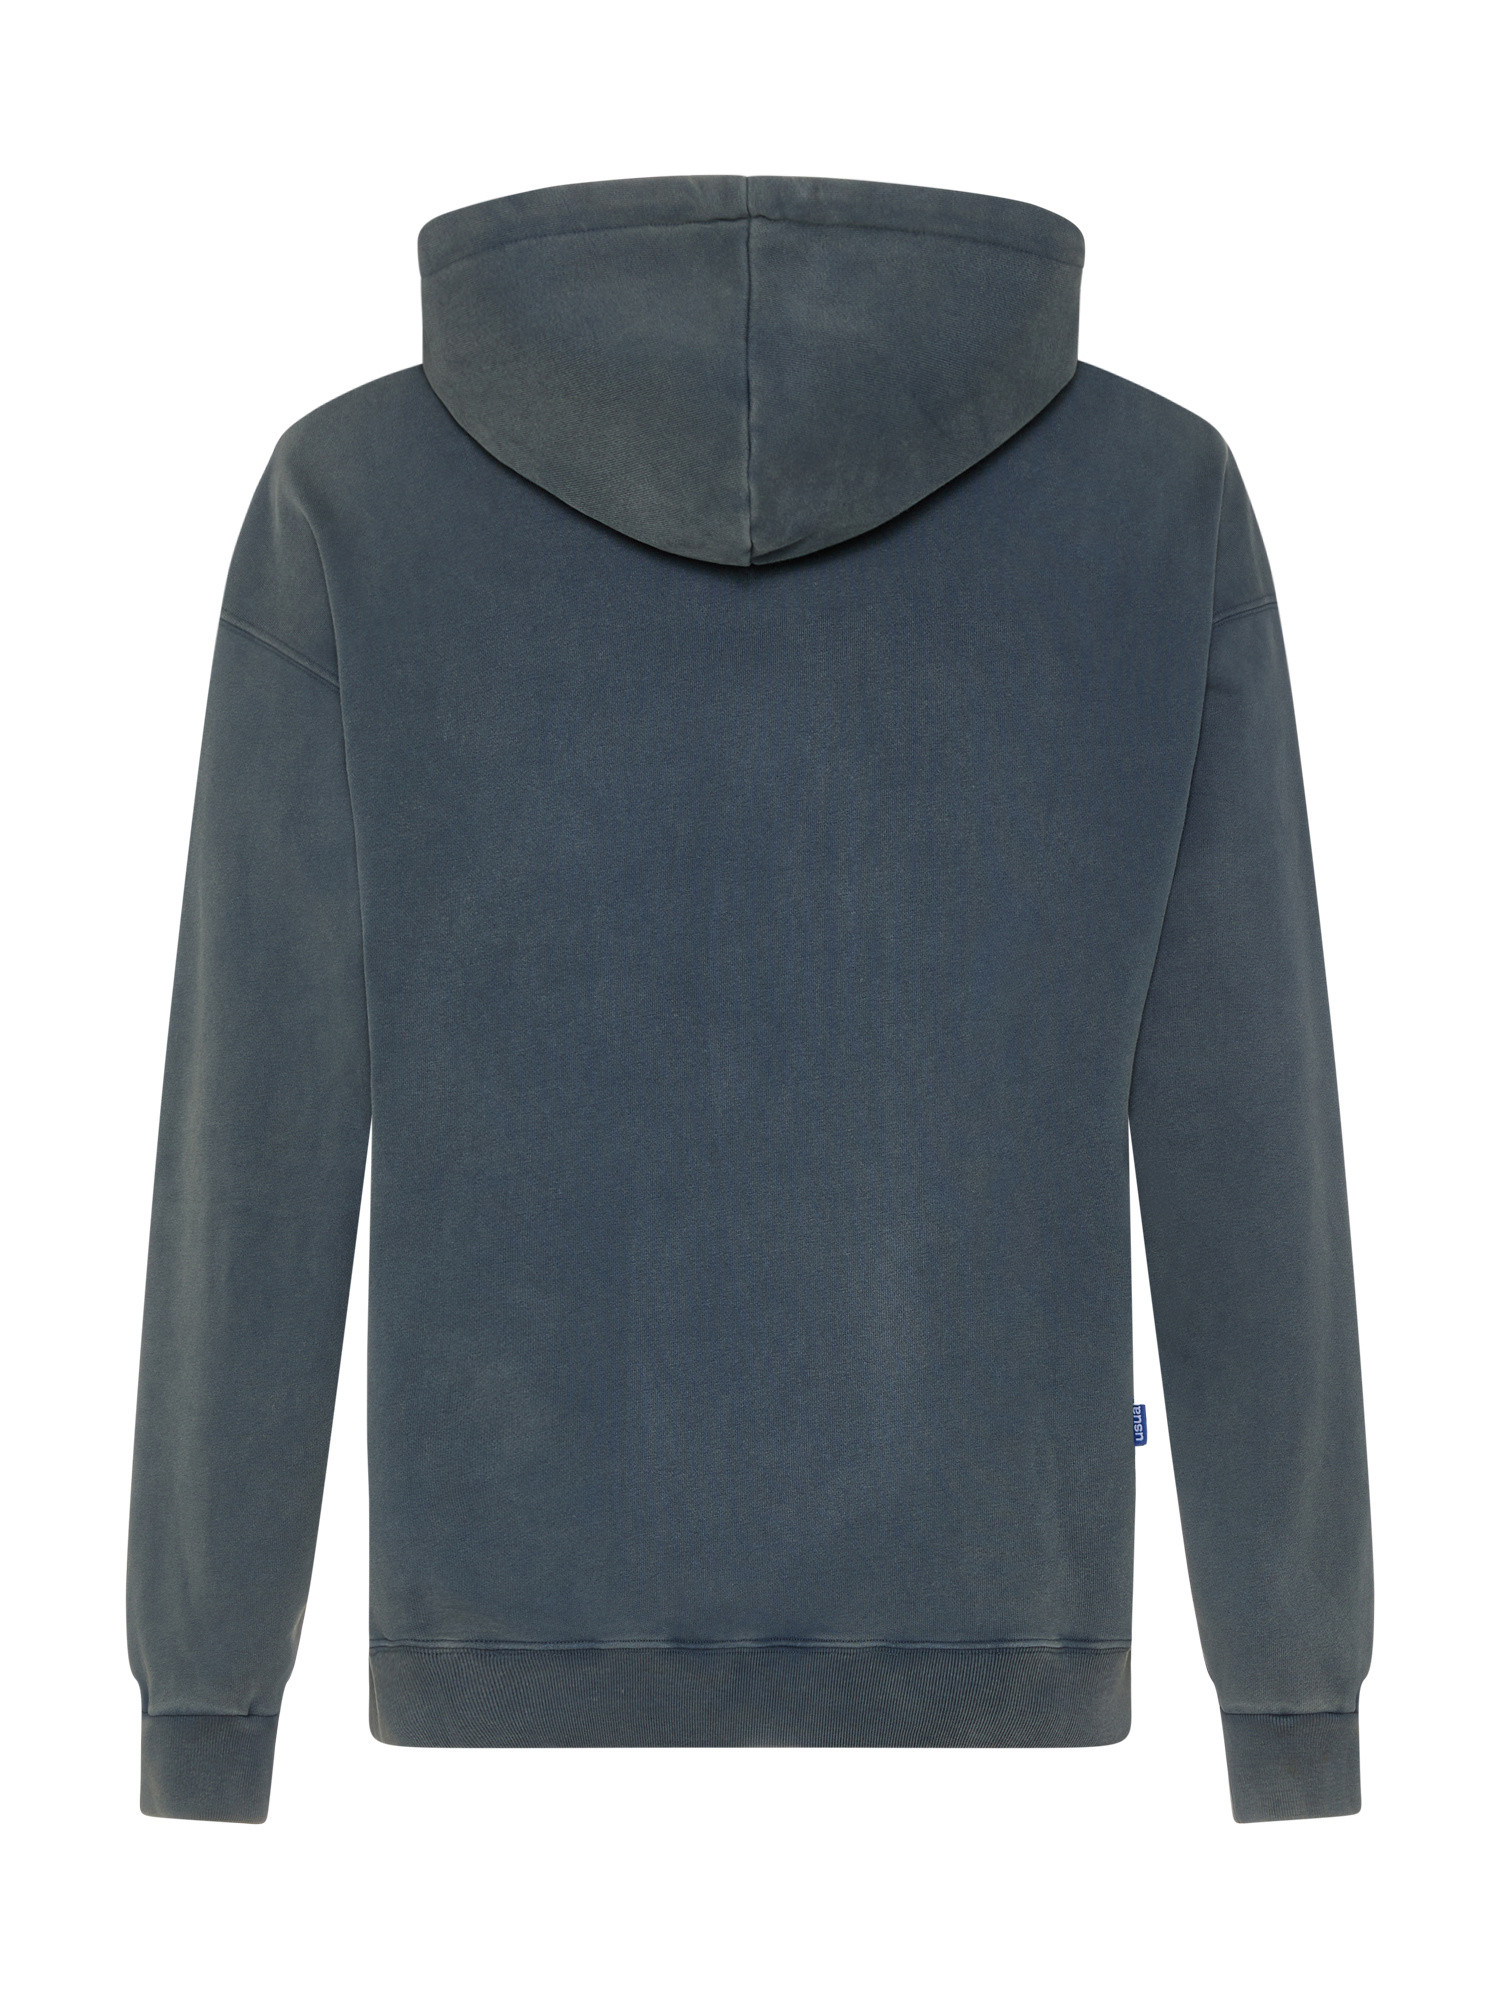 Usual - About Hooded Sweatshirt, Dark Grey, large image number 1